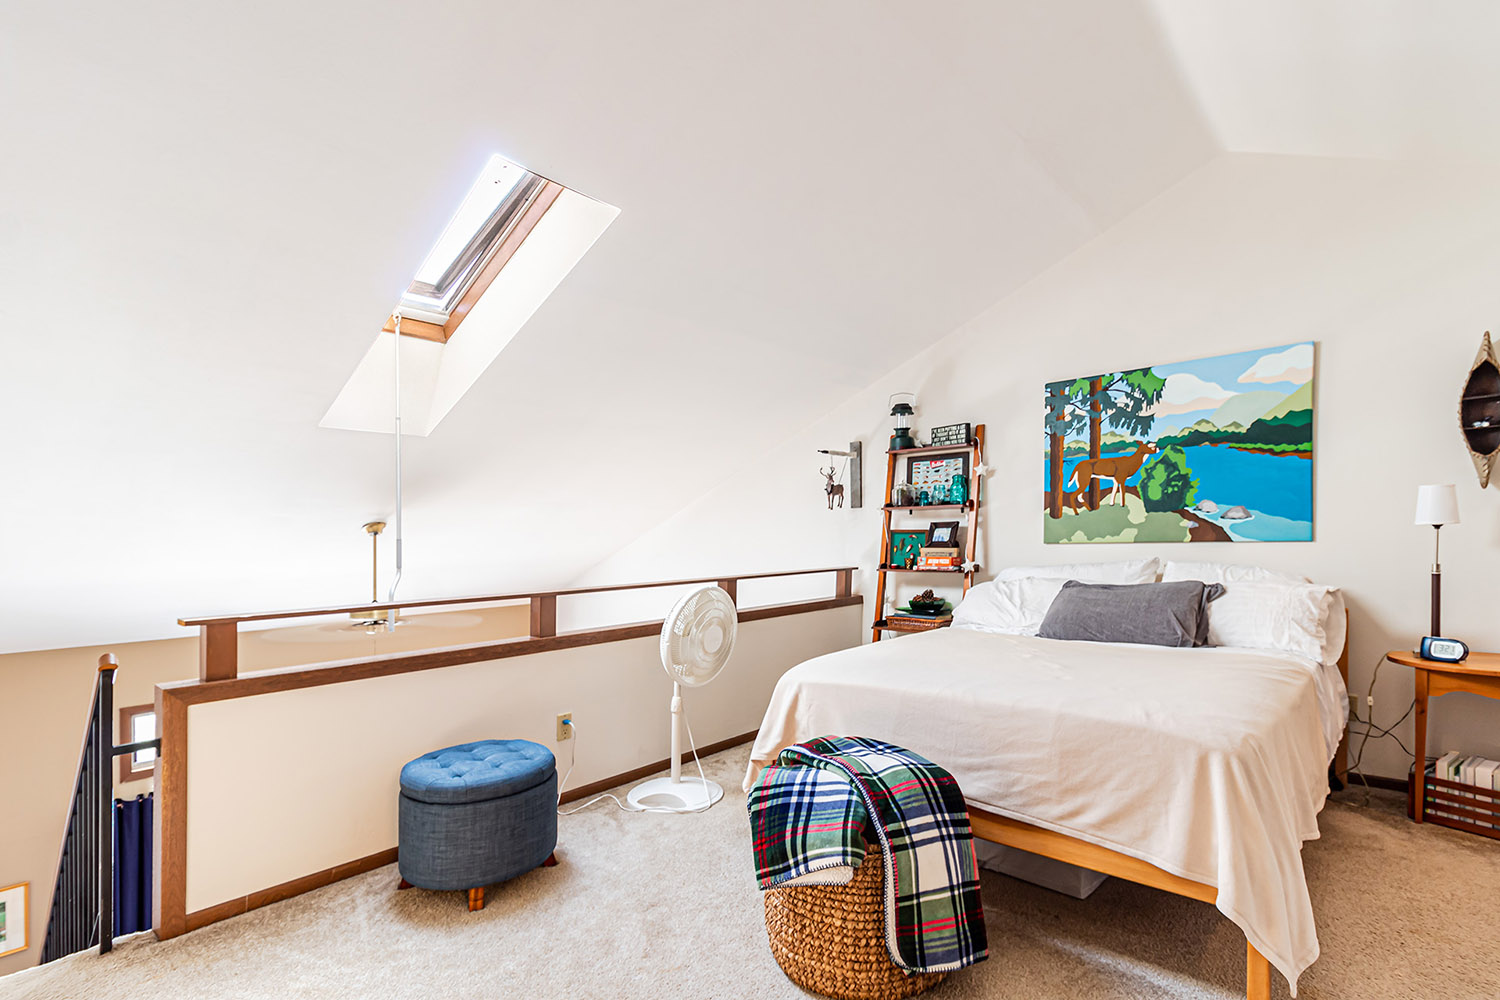 An apartment loft bedroom with a bed, bookshelf, side table, stool, fan, and a skylight